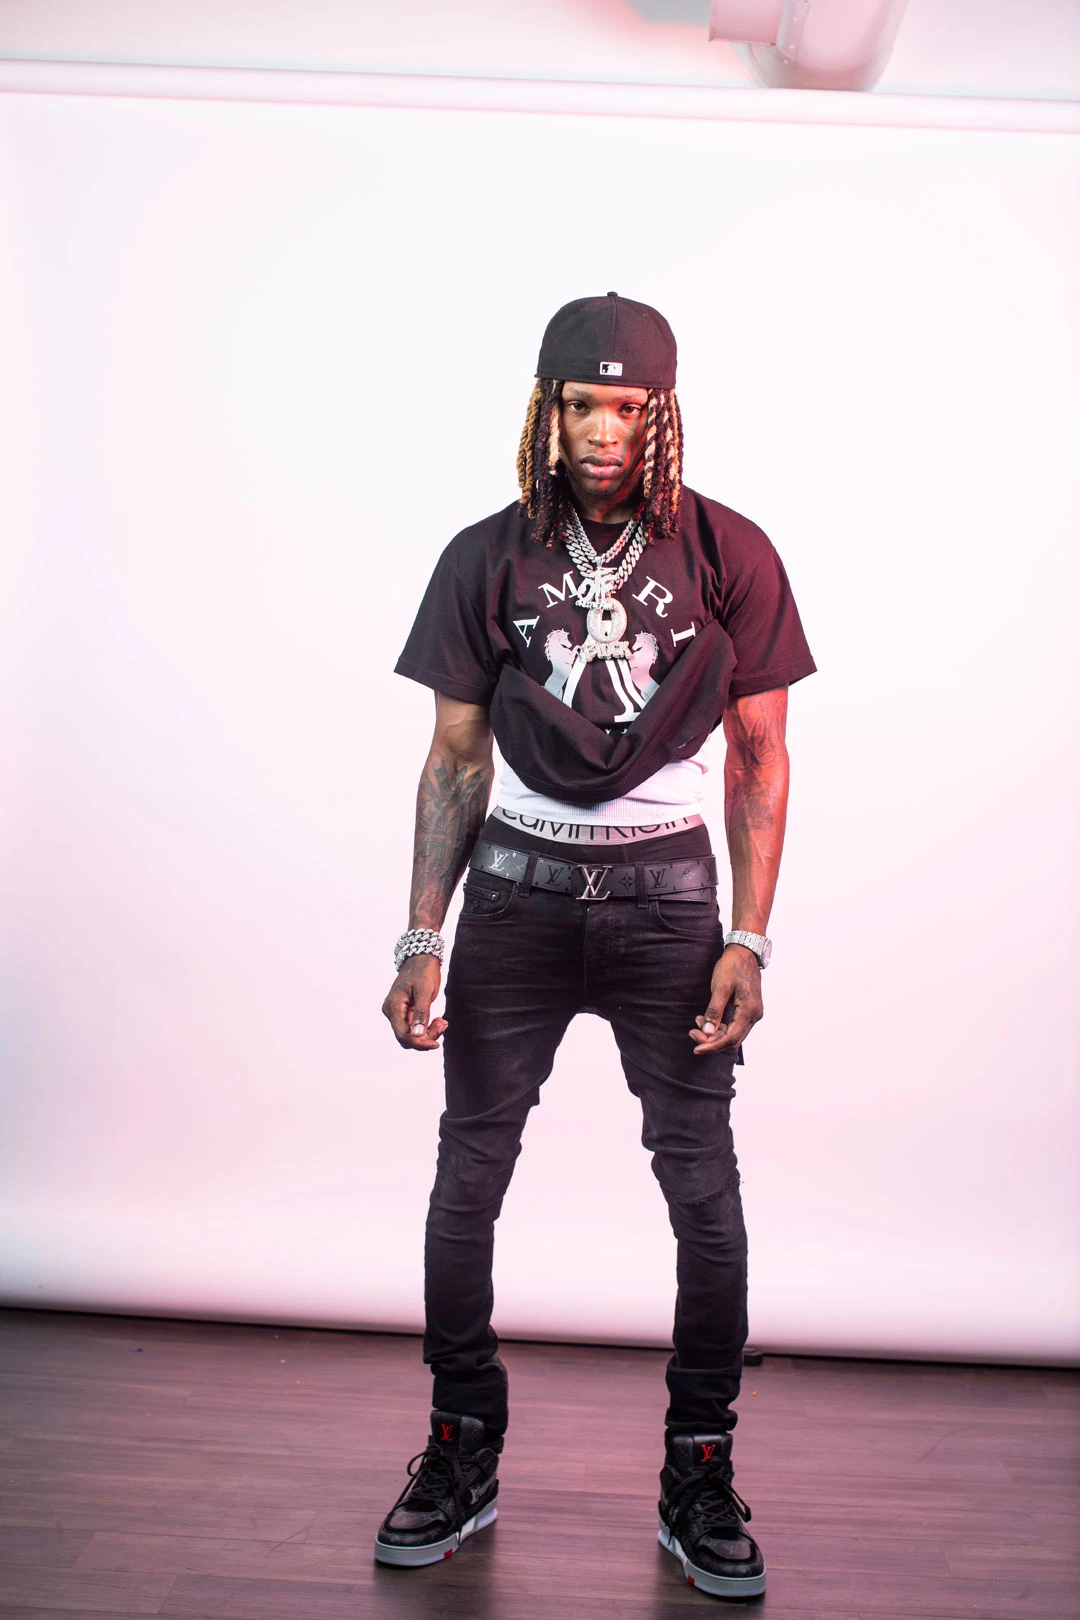 King Von climbs to the Top 5 at Billboard 200 after being shot - Falseto